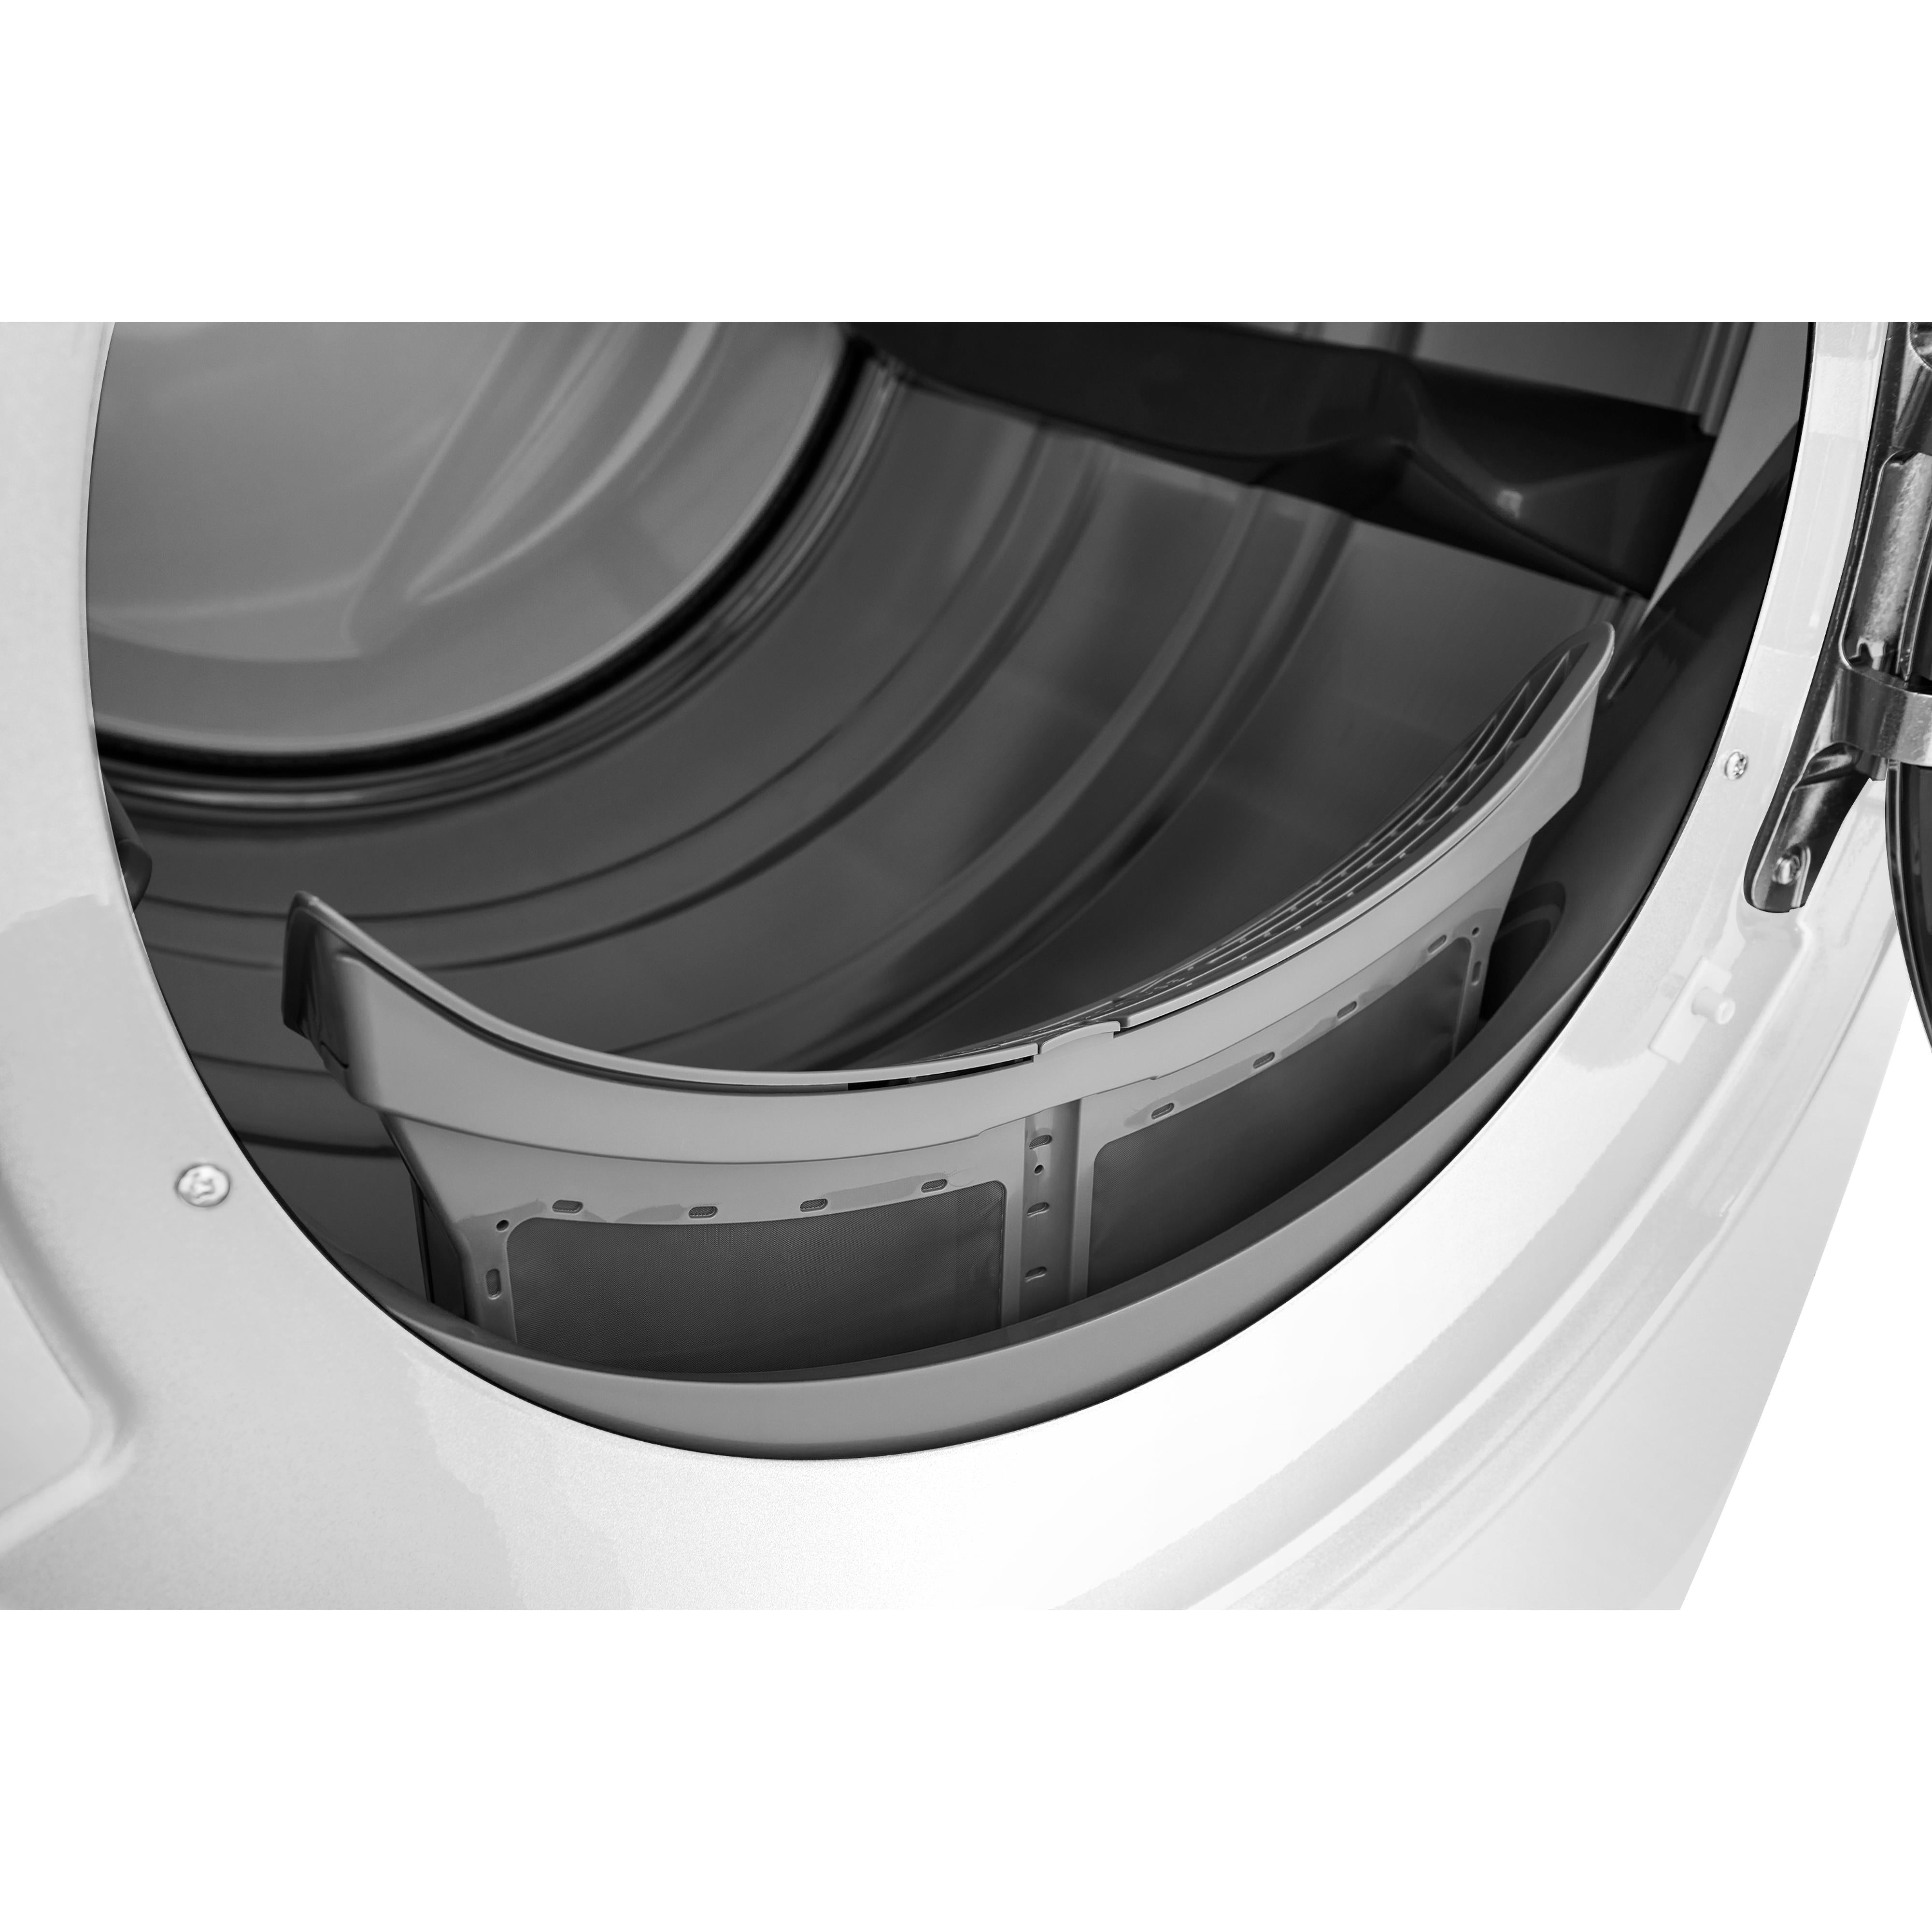 Electrolux 8.0 Electric Dryer with 11 Dry Programs ELFE7637AW